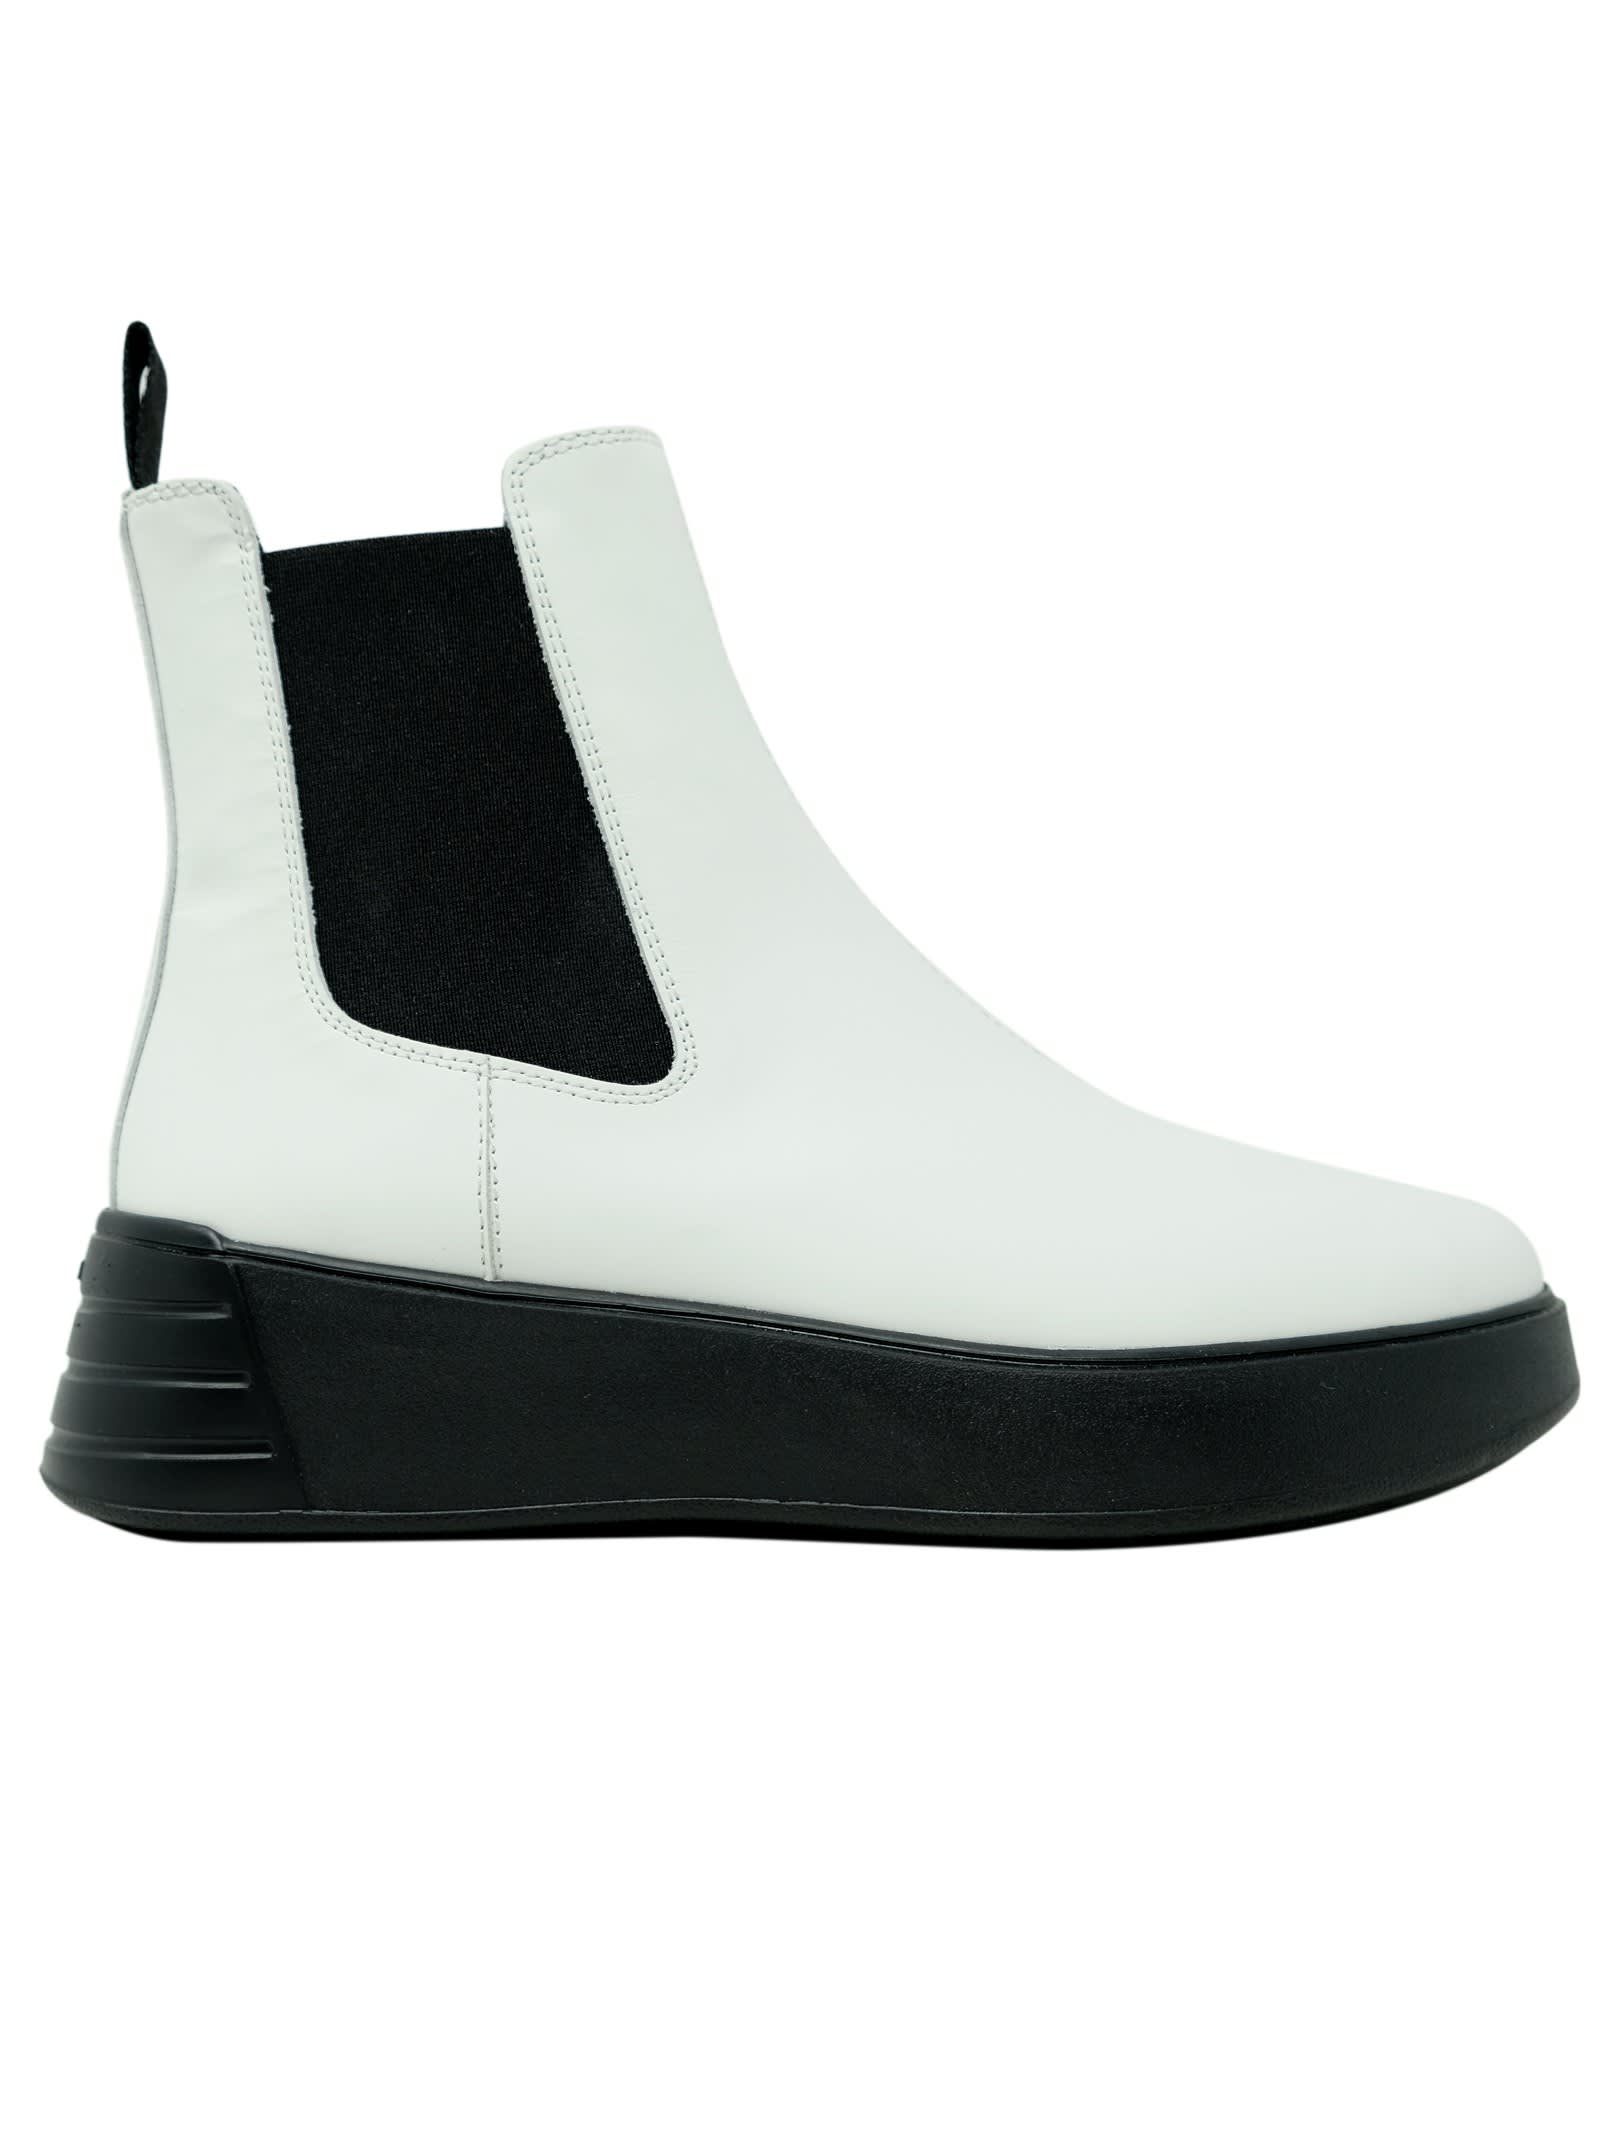 Hogan White Leather Rebel H562 Ankle Boots